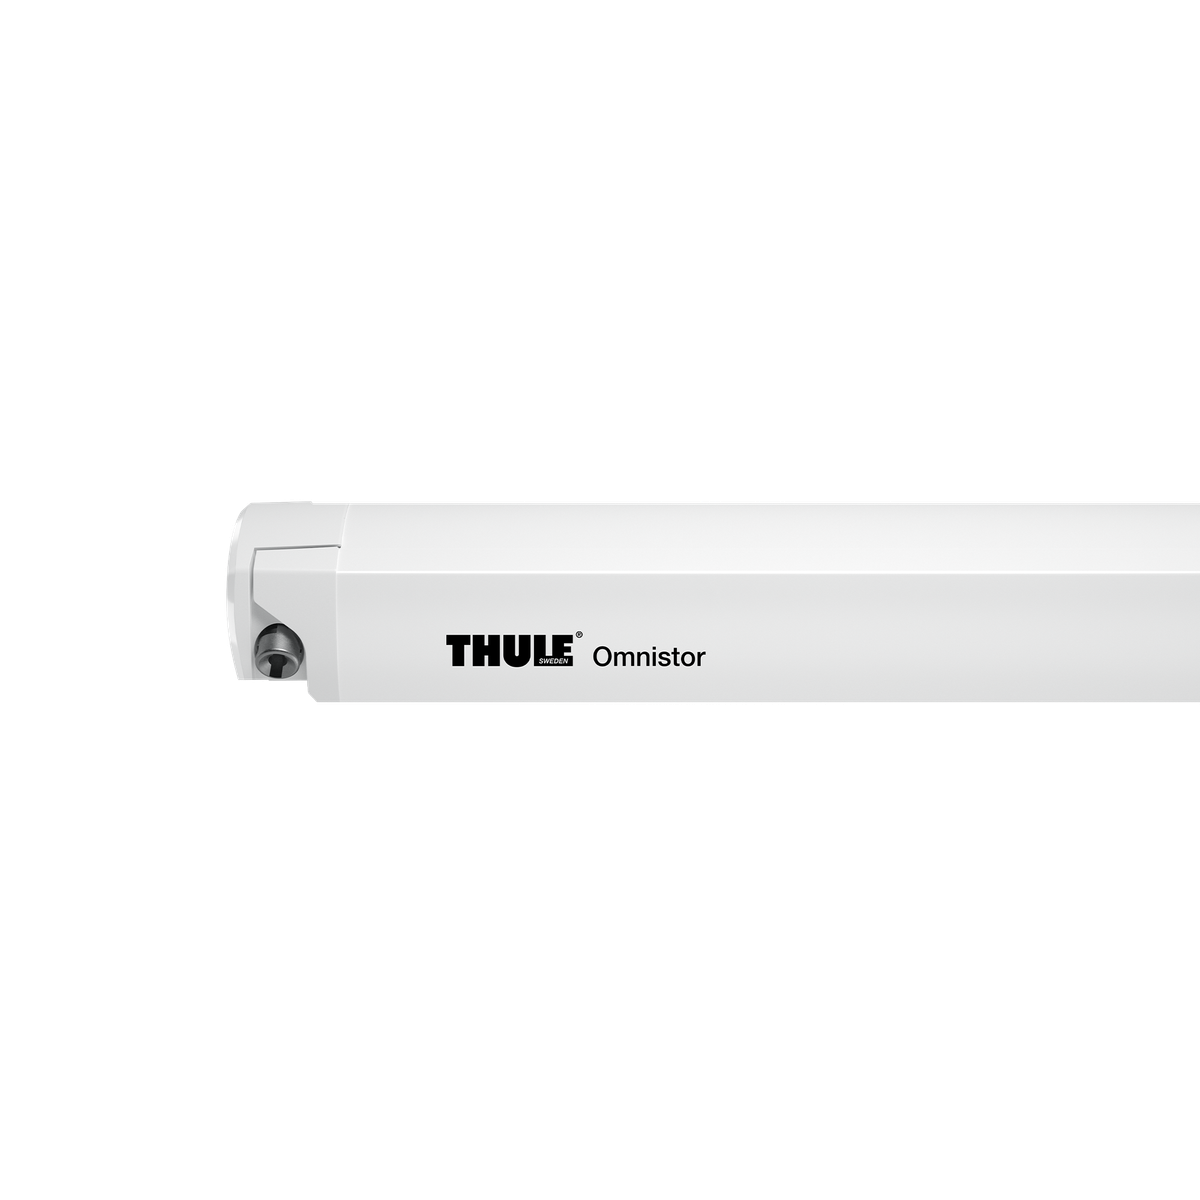 Thule Omnistor 6300 roof awning 5.00x2.50 white